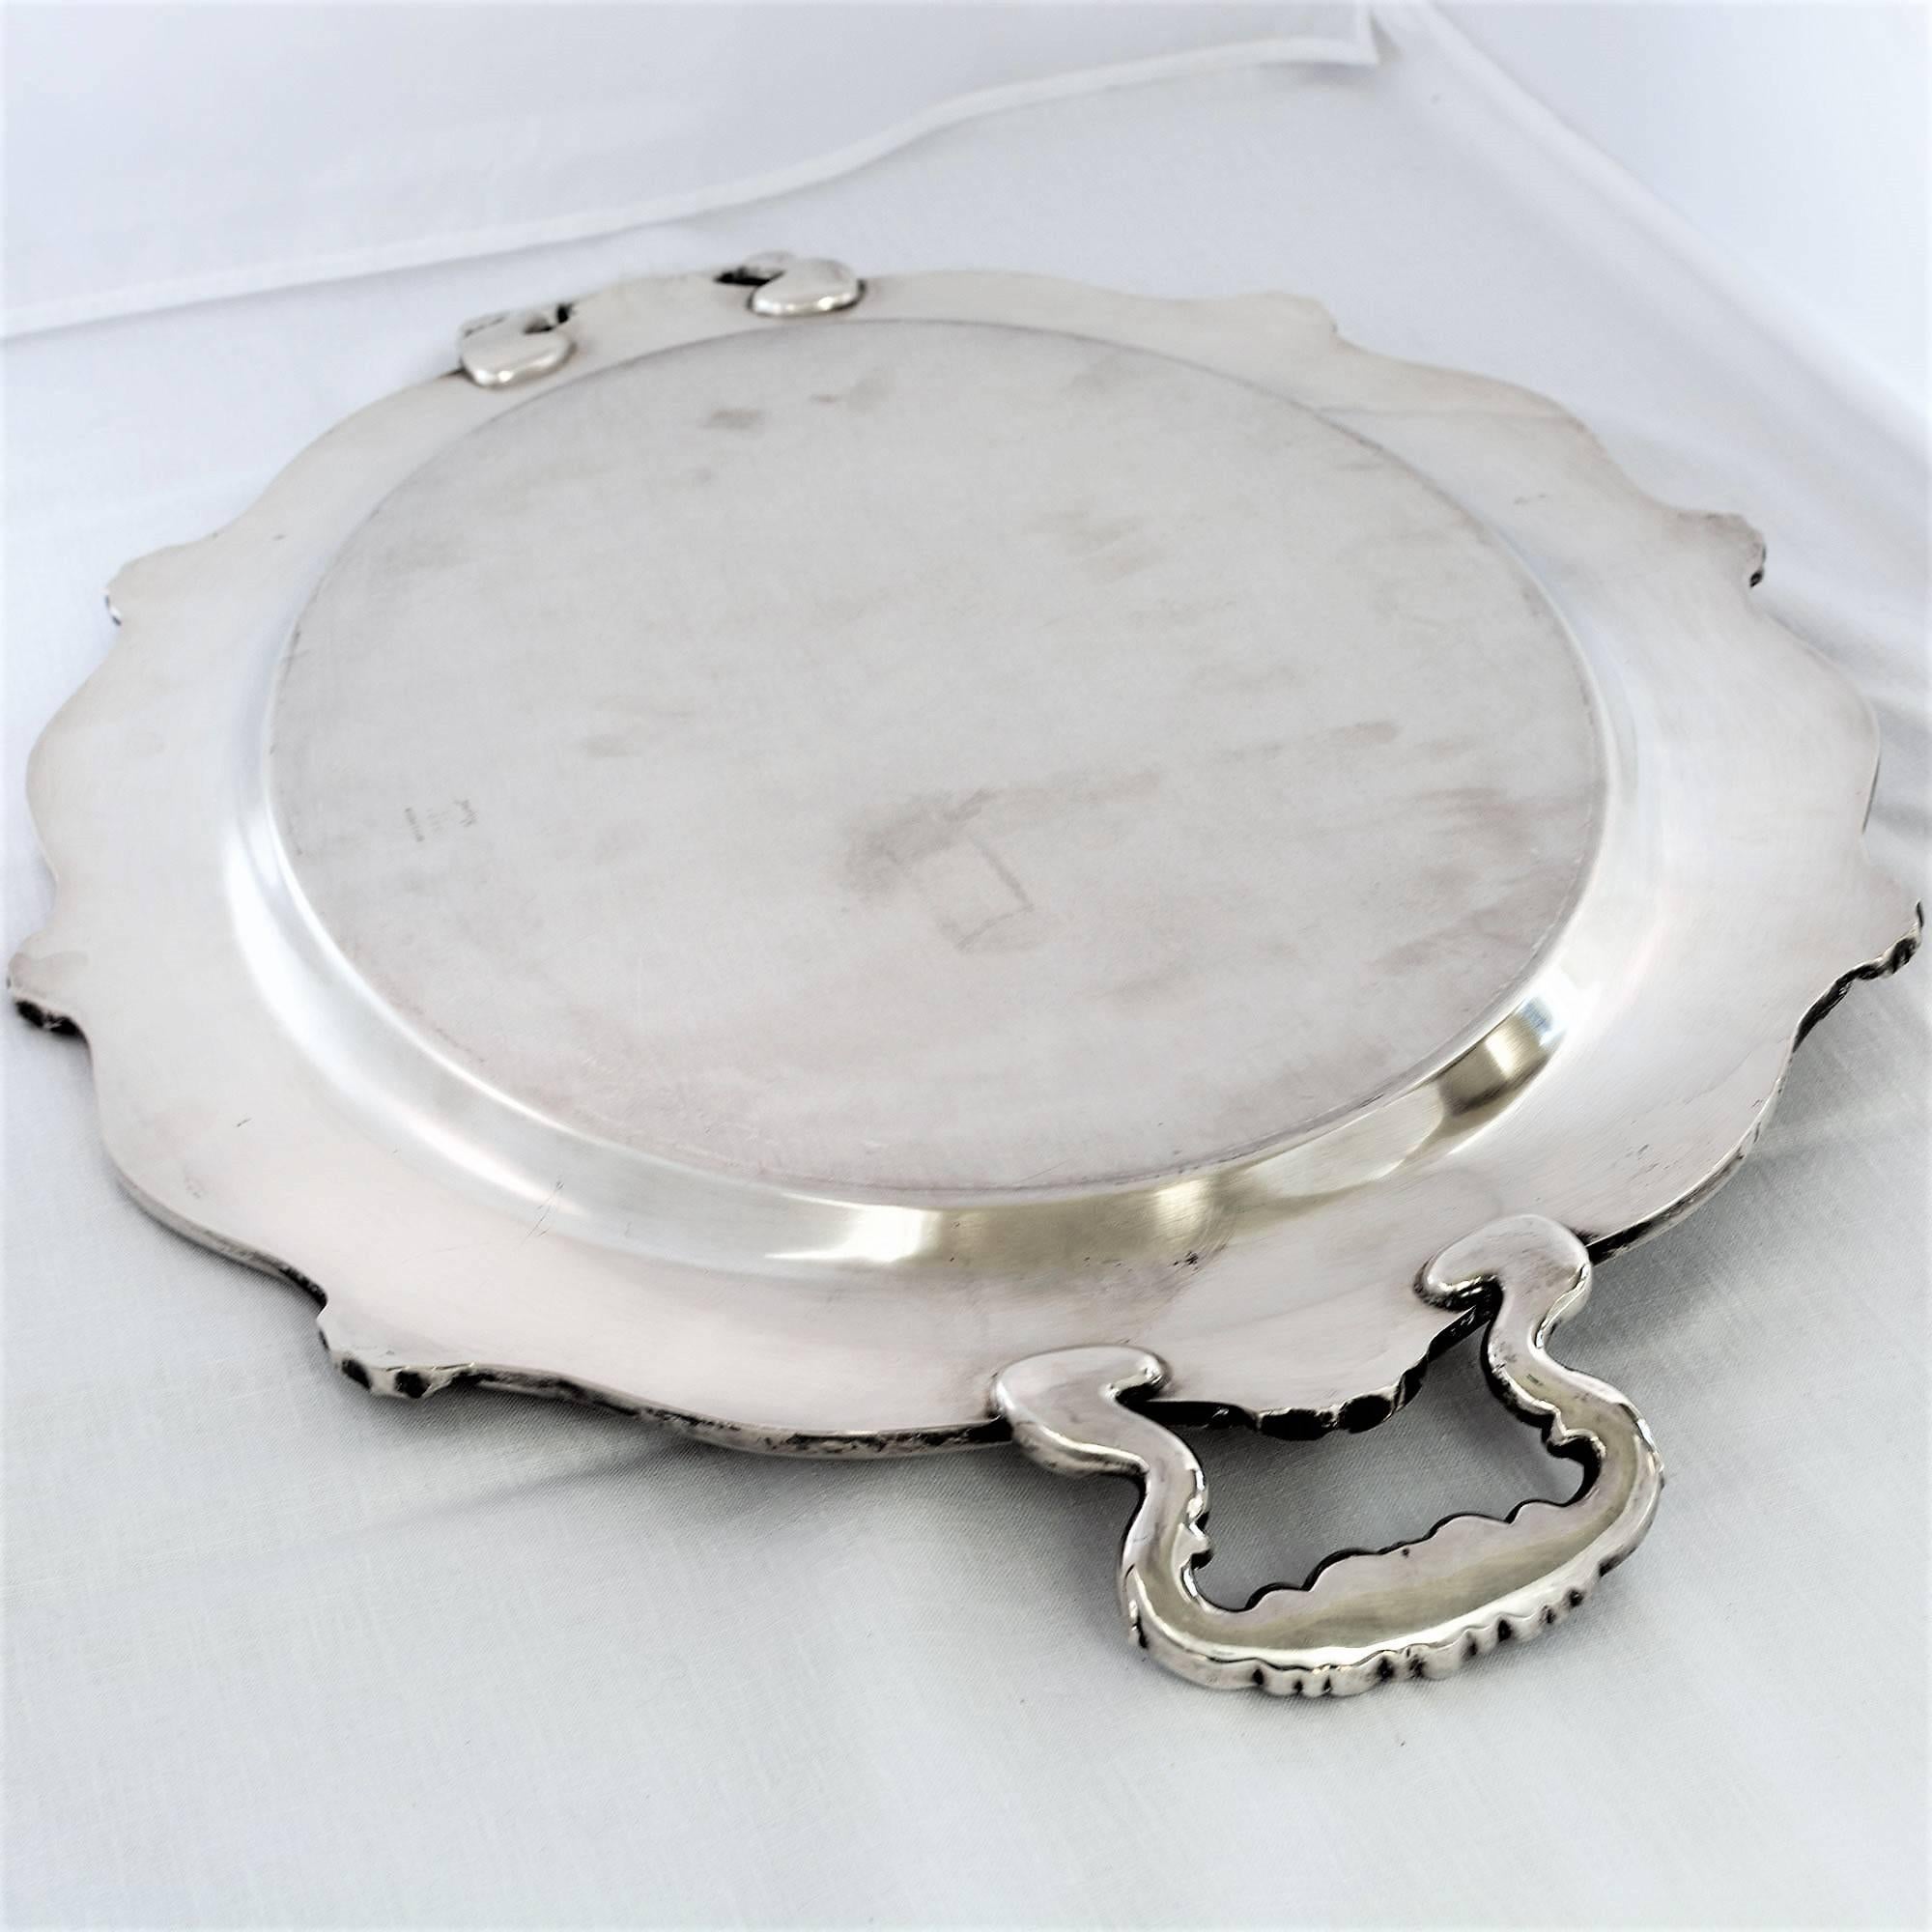 Amazing large silver plate Regent pattern Reed and Barton butler tray is from the early 1900s. Ornate French style etchings on the platter's service and sculptured with scrolls, leaf and floral accents. This tray is a lovely reminder of the gracious